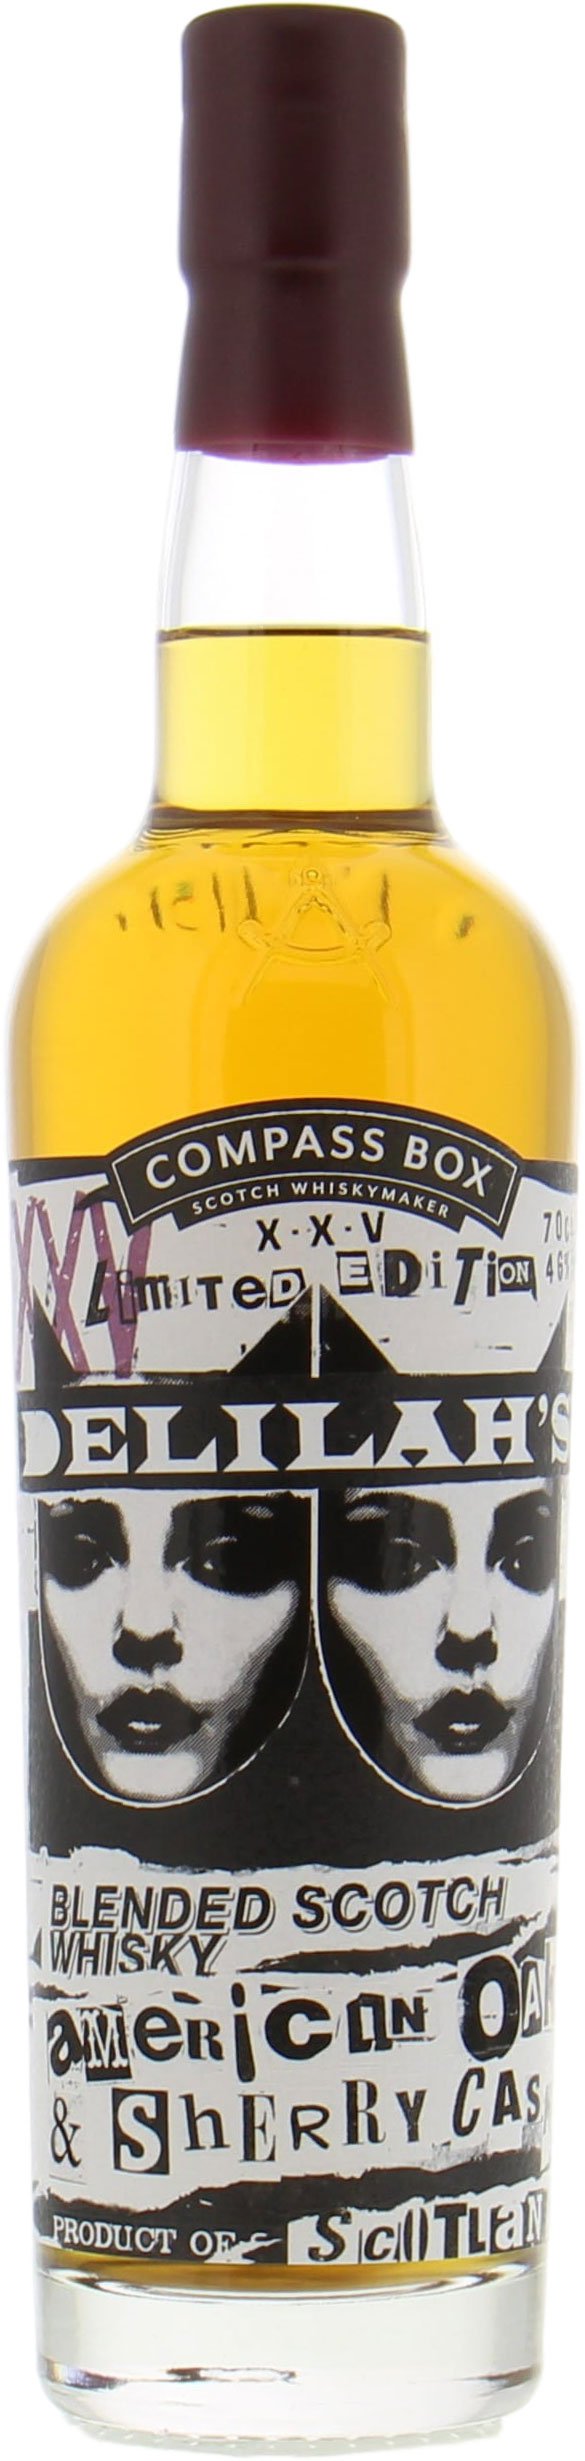 Compass Box - Delilah's XXV 46% NV In Original Container